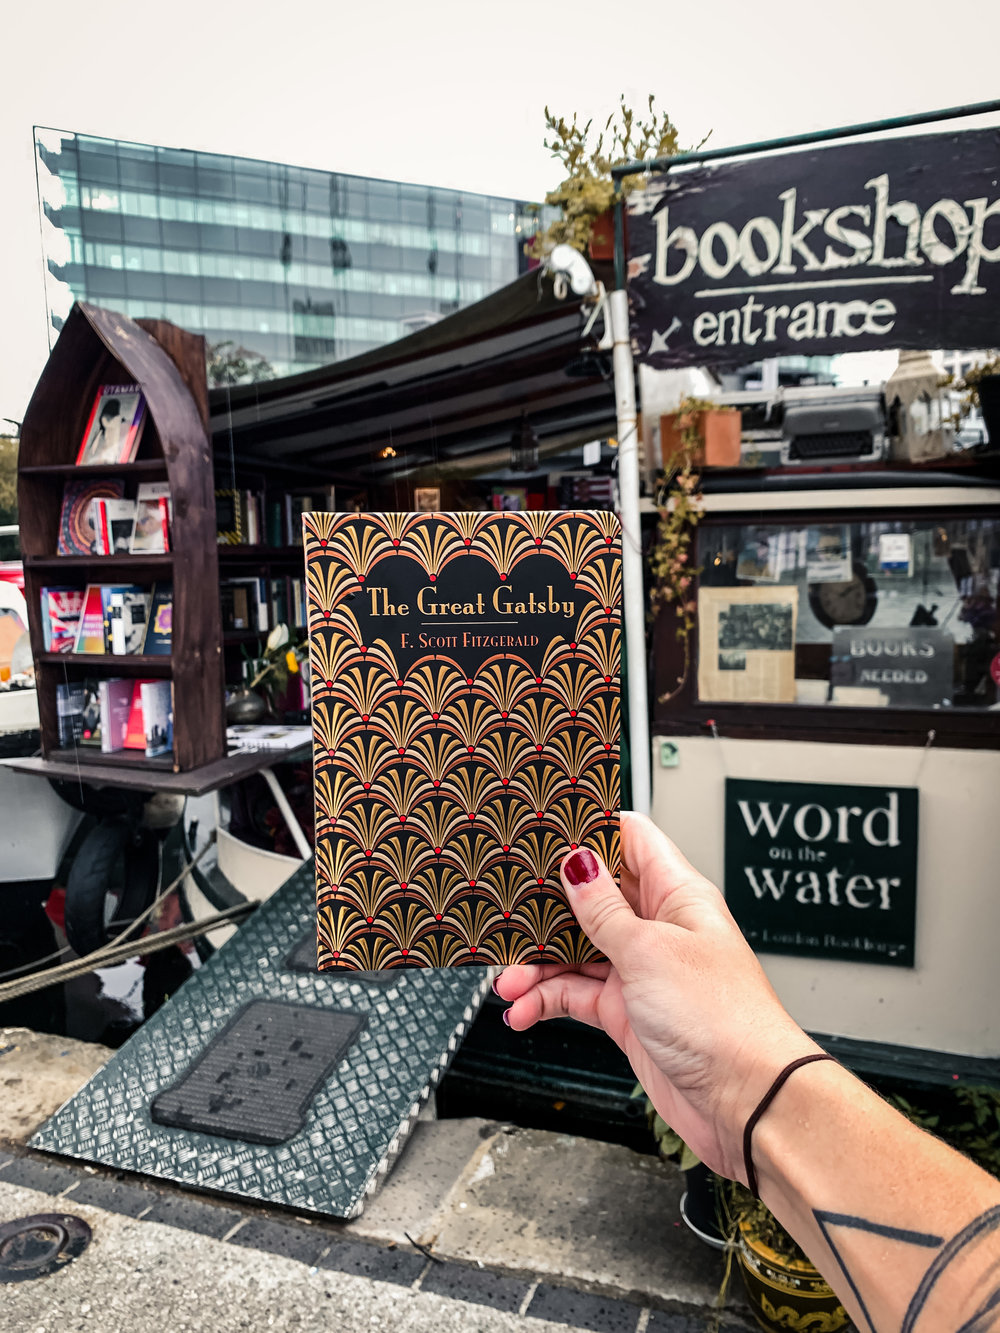 Word on the water is a charming little book barge located in the Kings Cross area of London. // mkkmdesigns